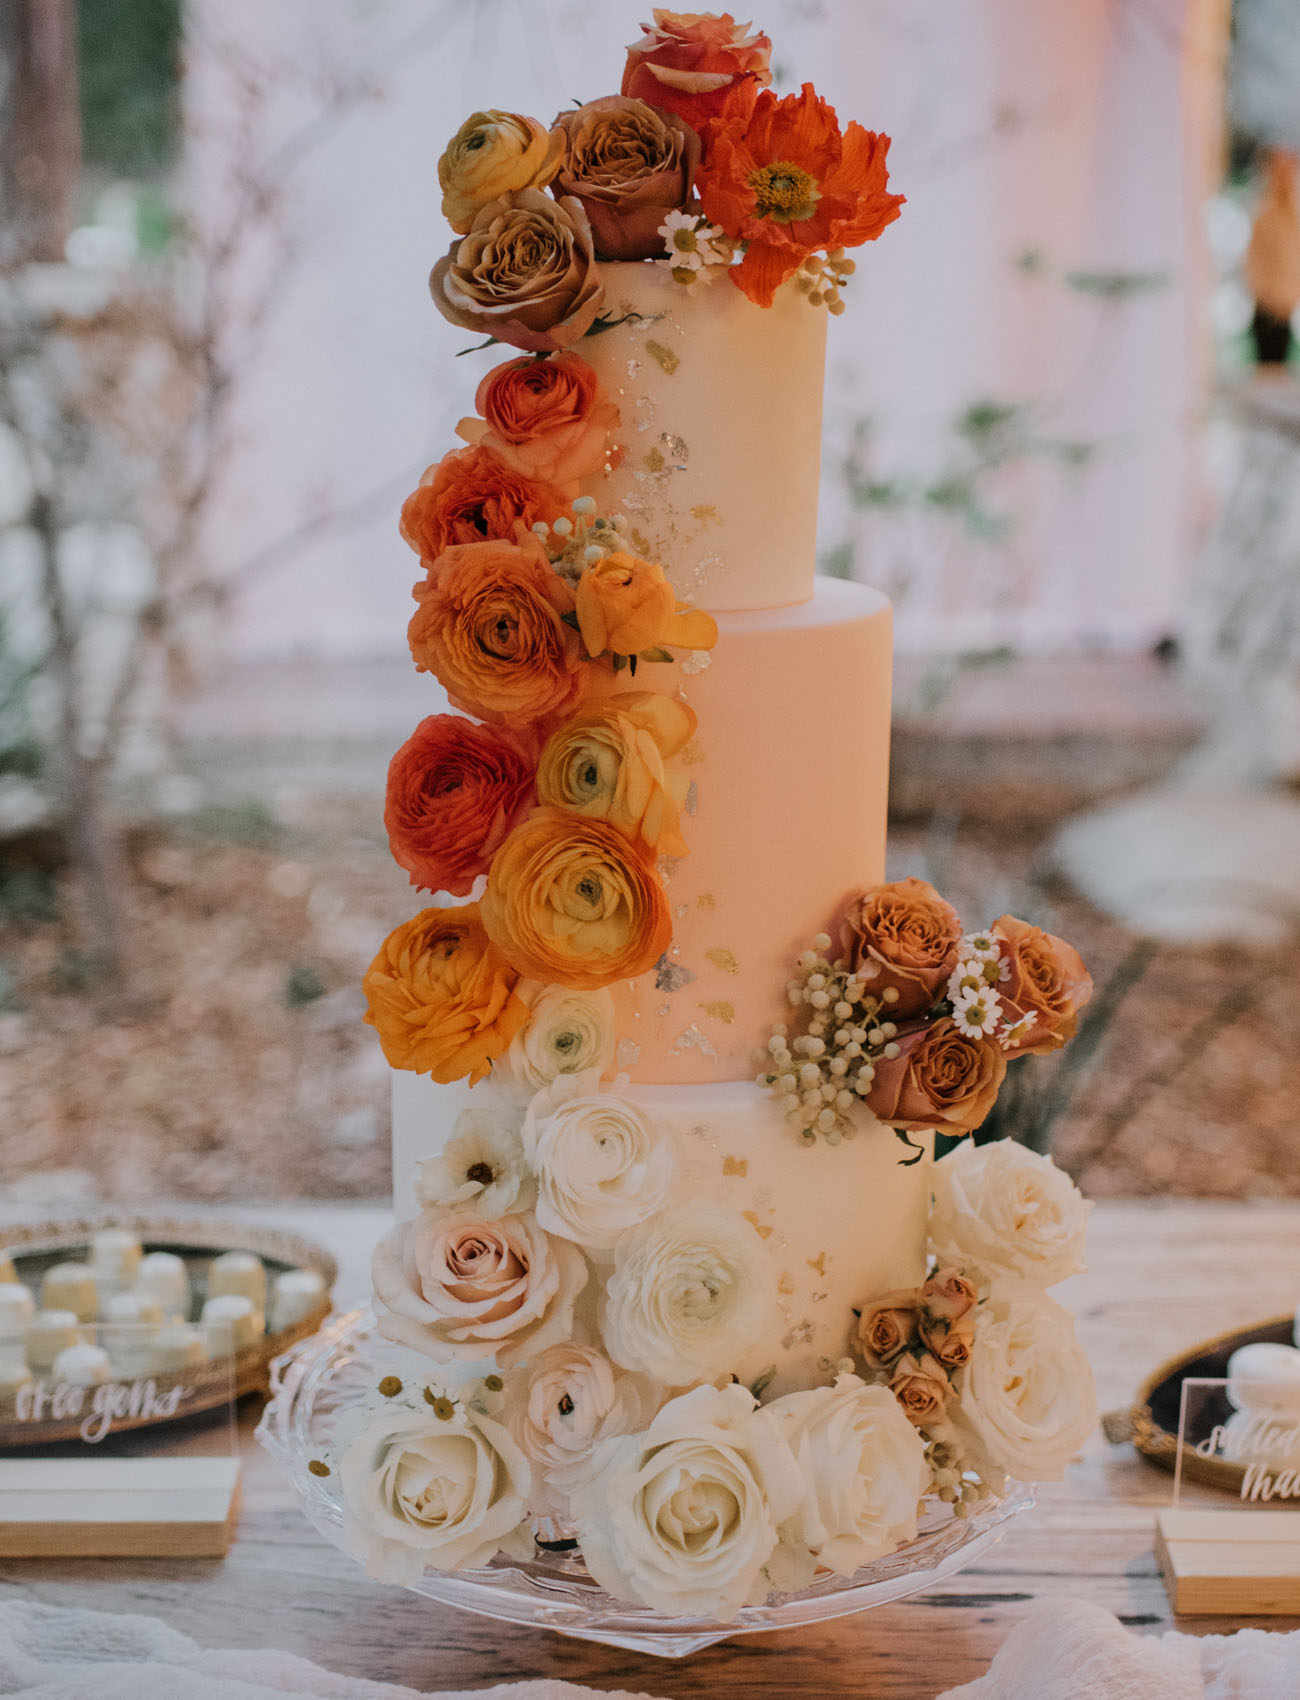 jaw-dropping floral cakes